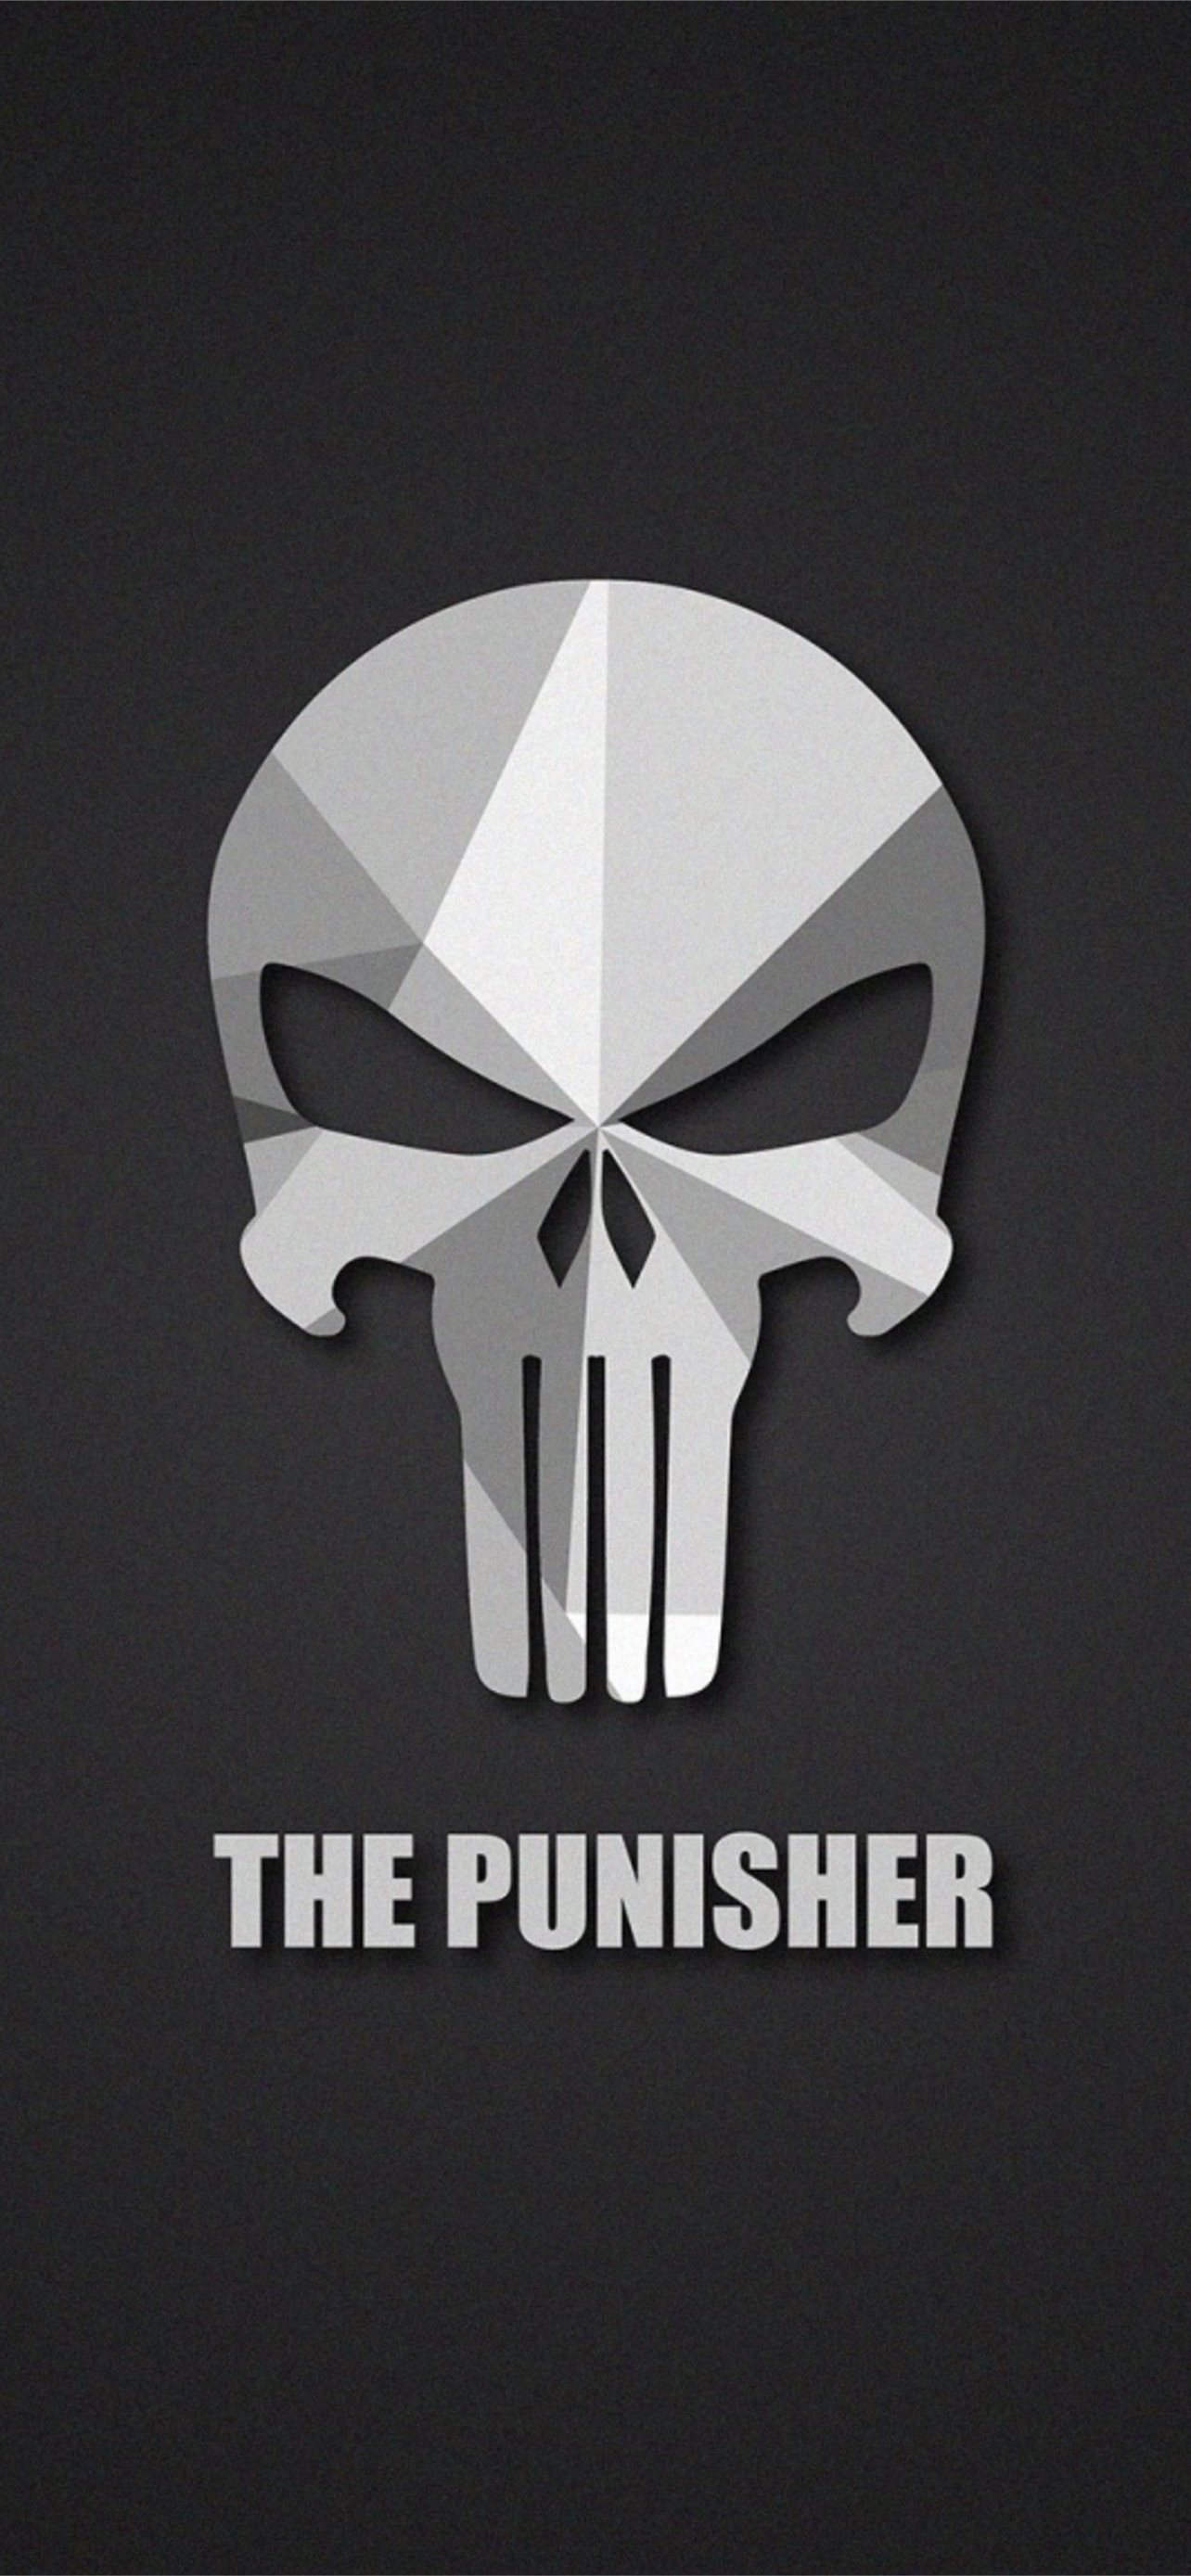 576664 1920x1080 punisher wallpaper pack 1080p hd PNG 632 kB - Rare Gallery  HD Wallpapers